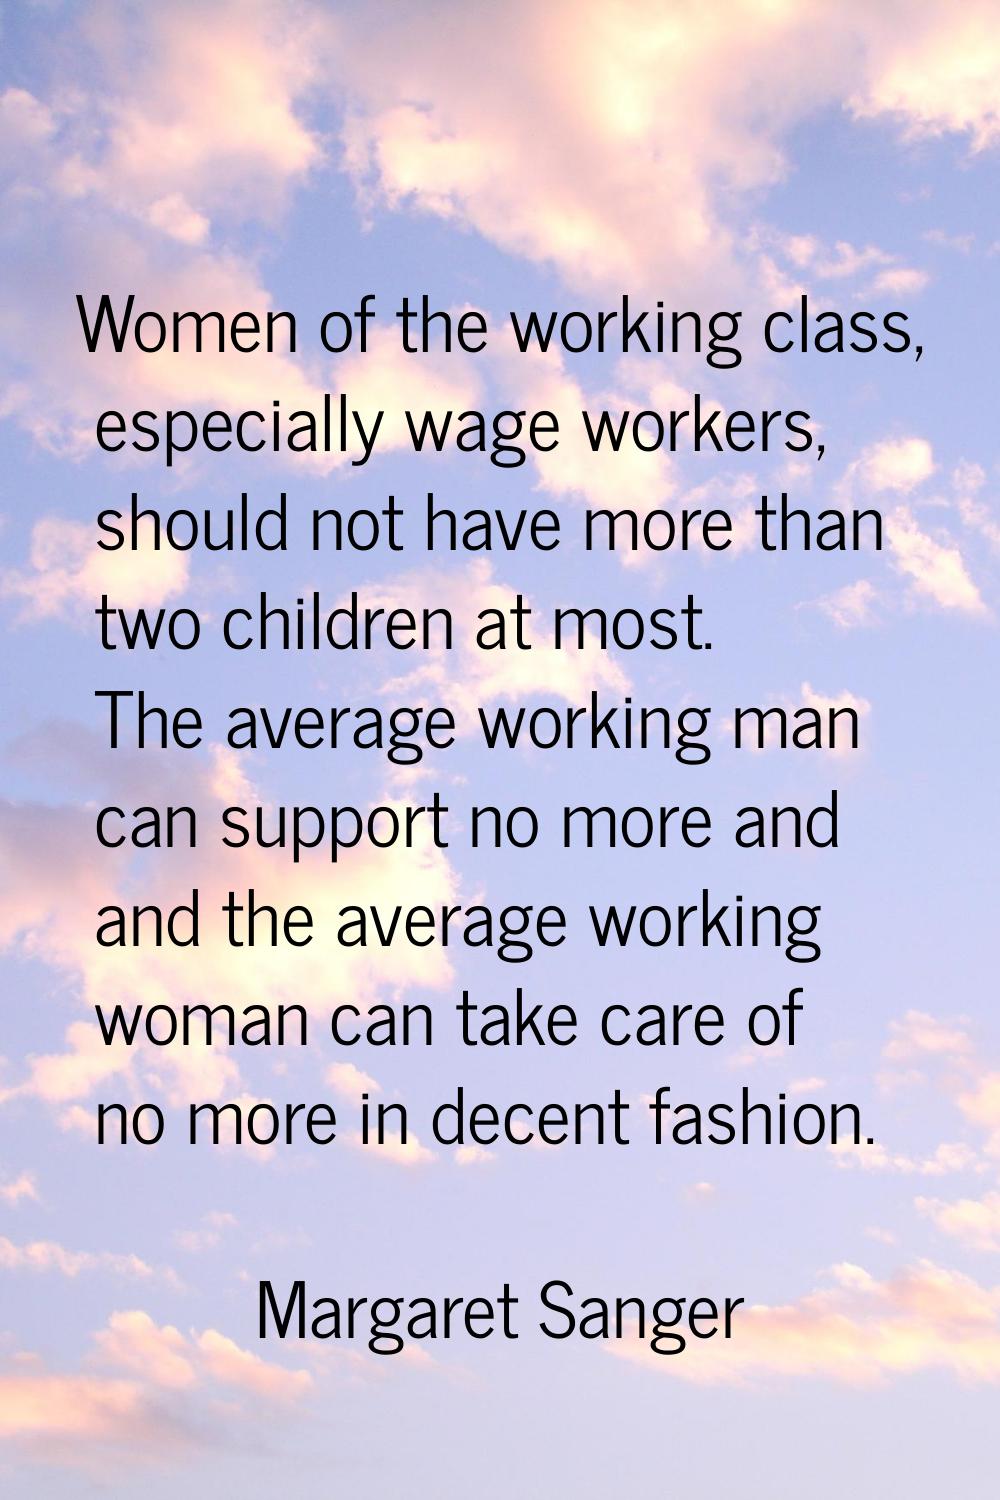 Women of the working class, especially wage workers, should not have more than two children at most